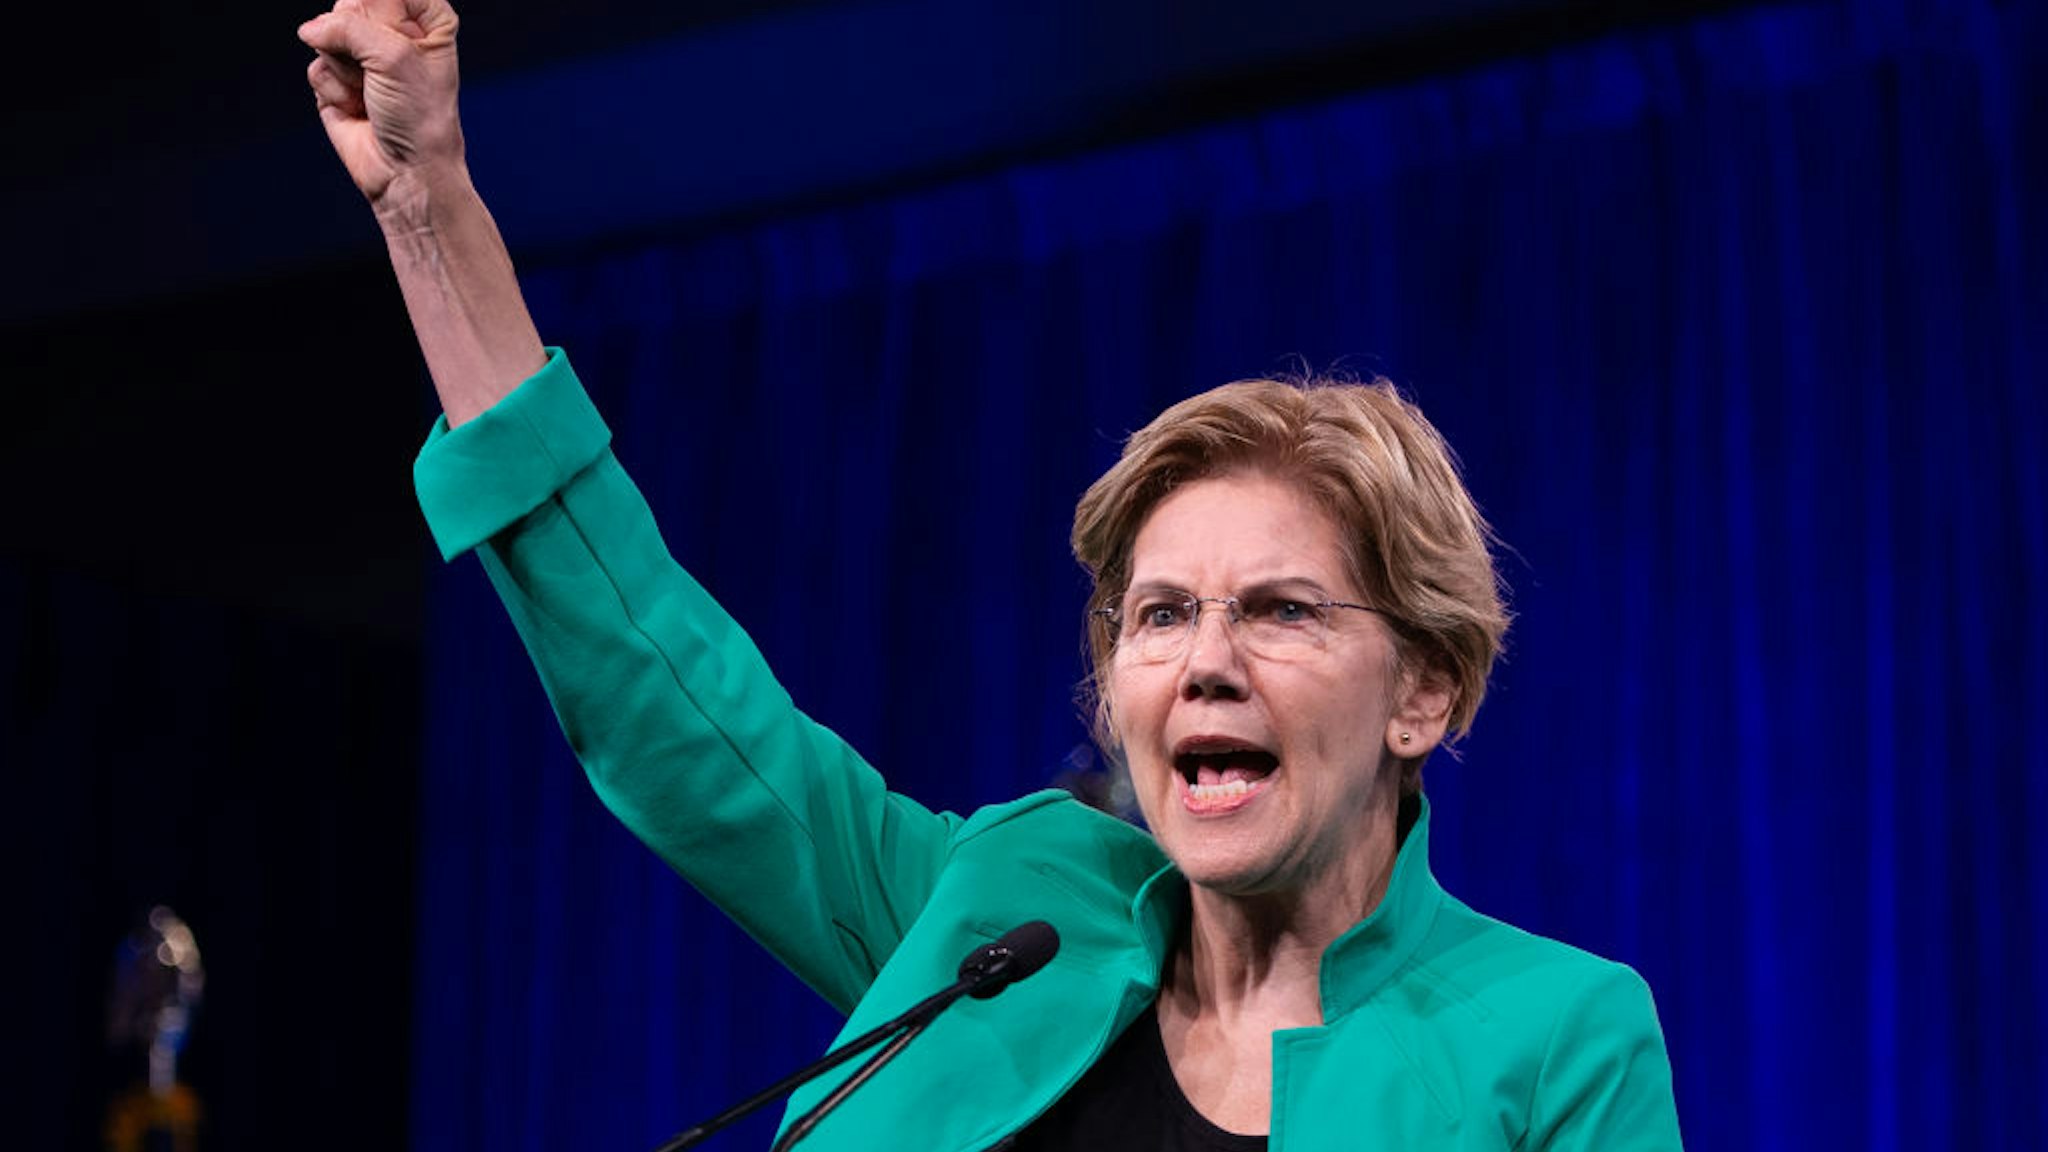 2020 US Democratic Presidential hopeful US Senator from Massachusetts Elizabeth Warren speaks on-stage during the Democratic National Committee's summer meeting in San Francisco, California on August 23, 2019. (Photo by JOSH EDELSON / AFP) (Photo by JOSH EDELSON/AFP via Getty Images)